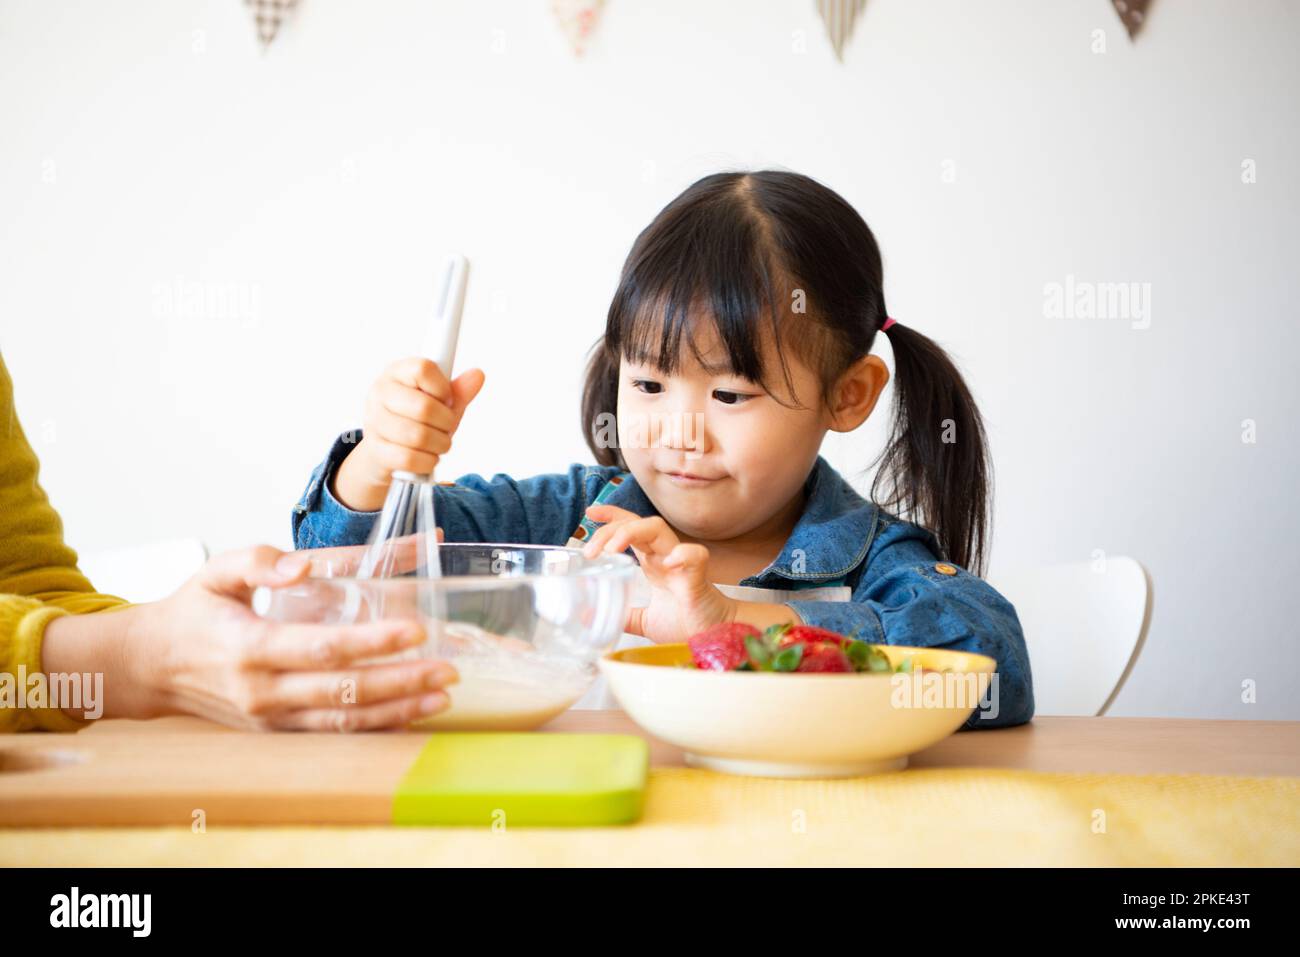 Parent and child making snacks Stock Photo